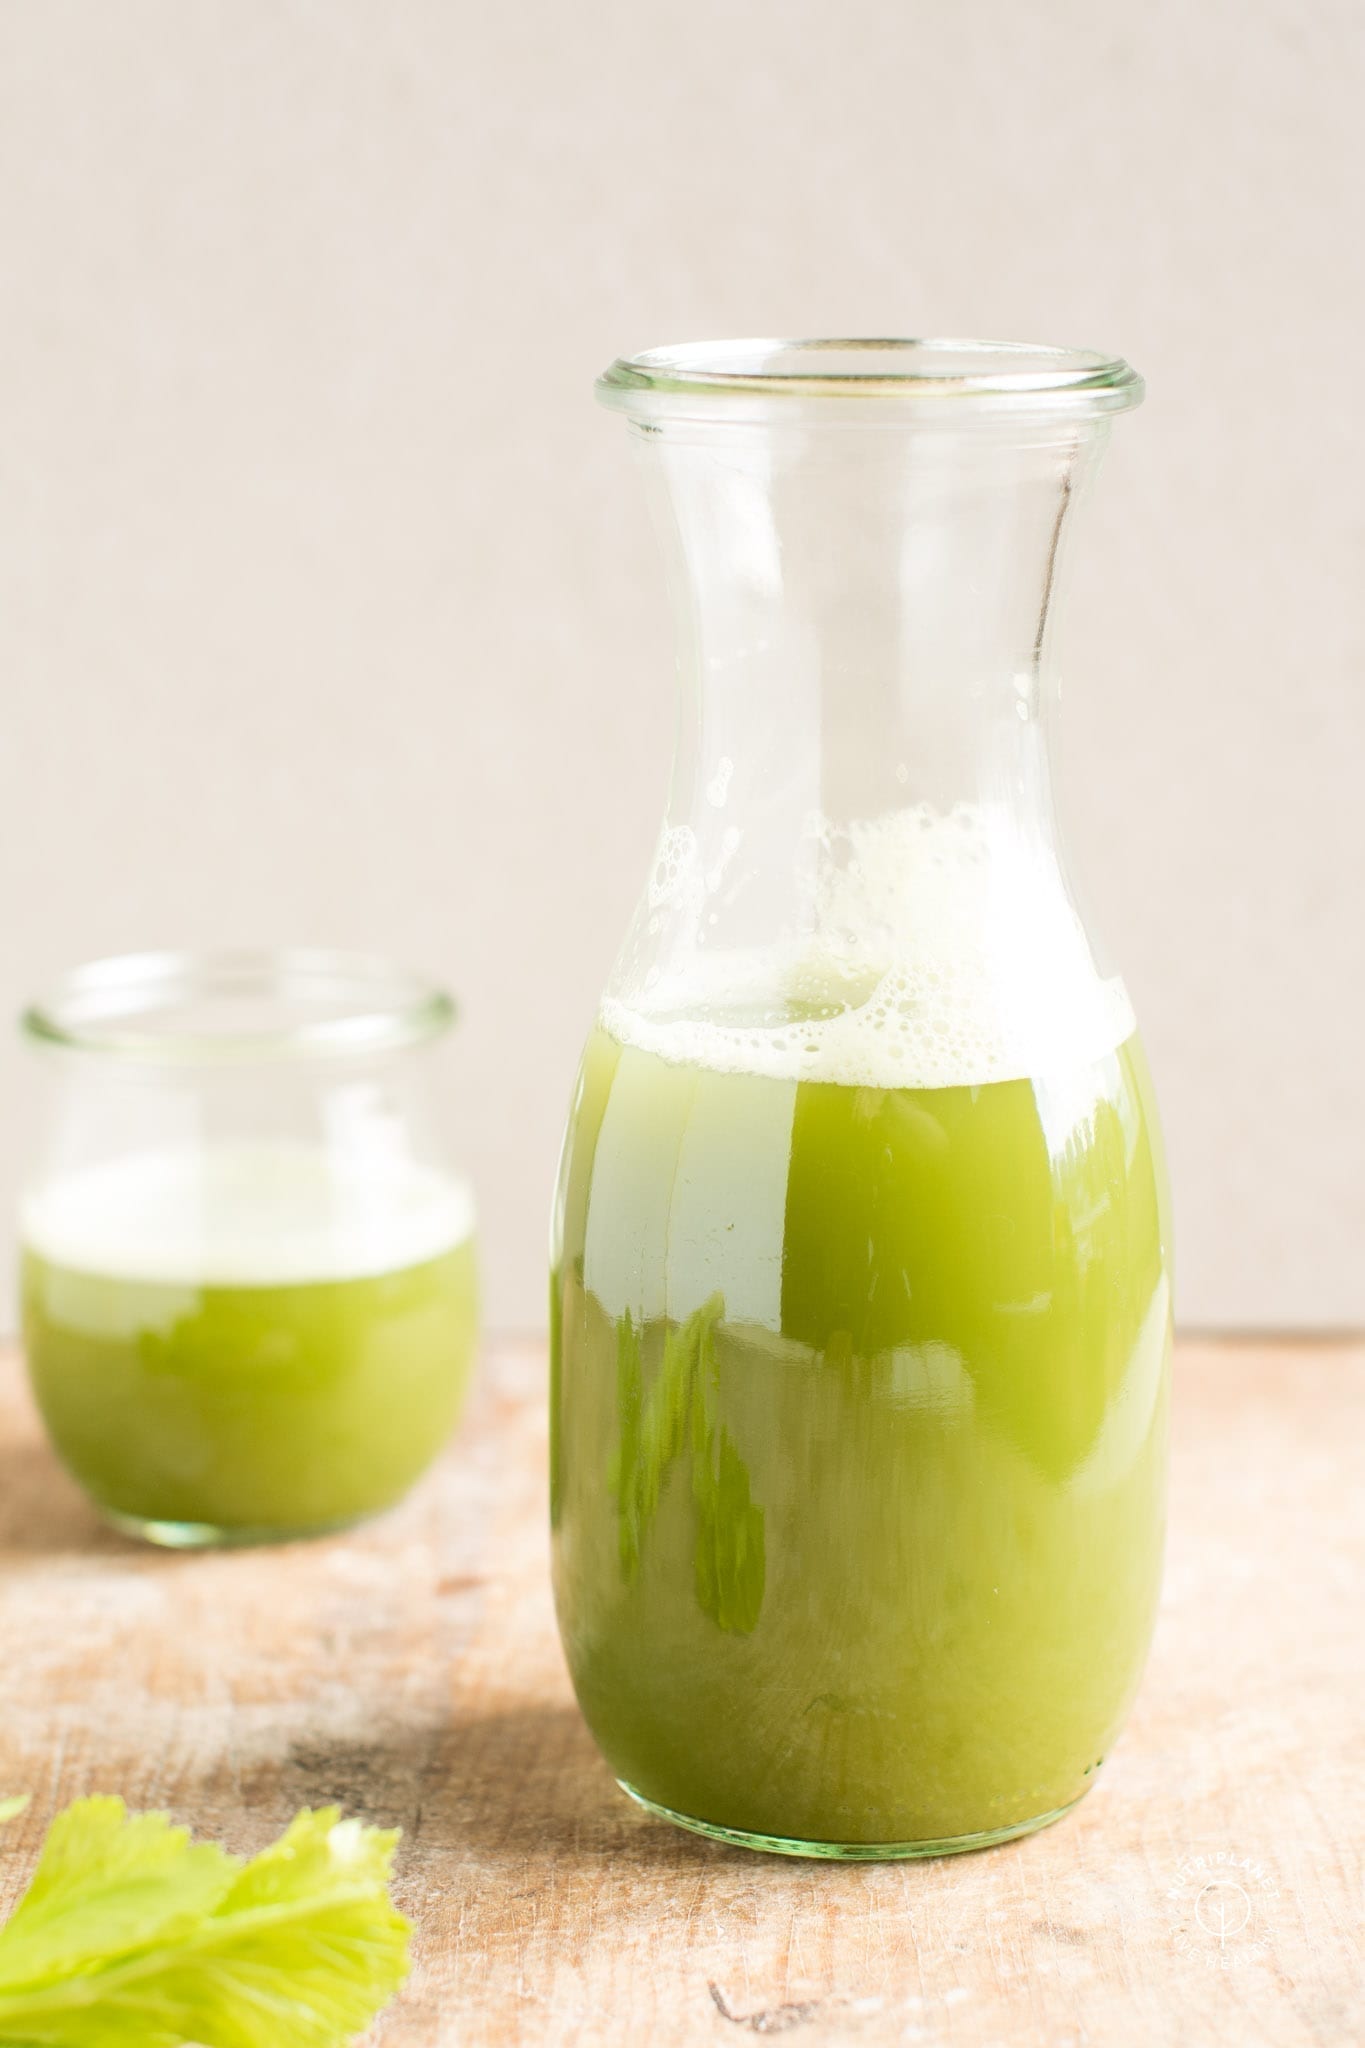 Celery juice benefits, my experience and the correct way to drink it.